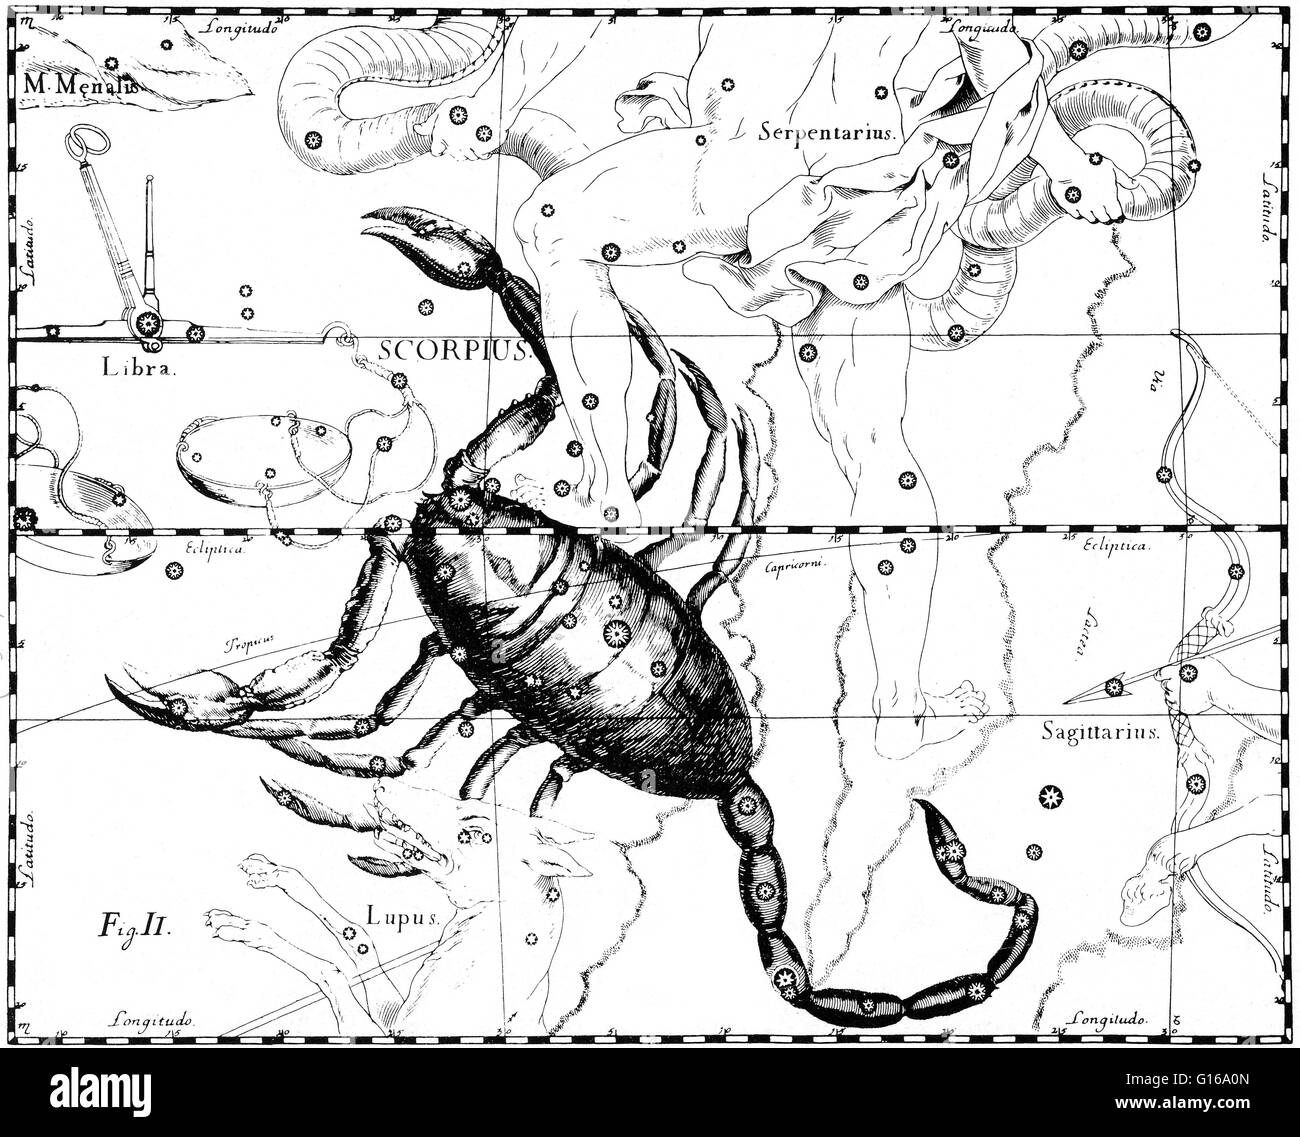 Scorpius constellation from Johannes Hevelius' Prodromus astronomiae, Firmamentum Sobiescianum, sive Uranographia, 1687. Scorpius, sometimes known as Scorpio, is one of the constellations of the zodiac. Its name is Latin for scorpion. It is one of the 48 Stock Photo